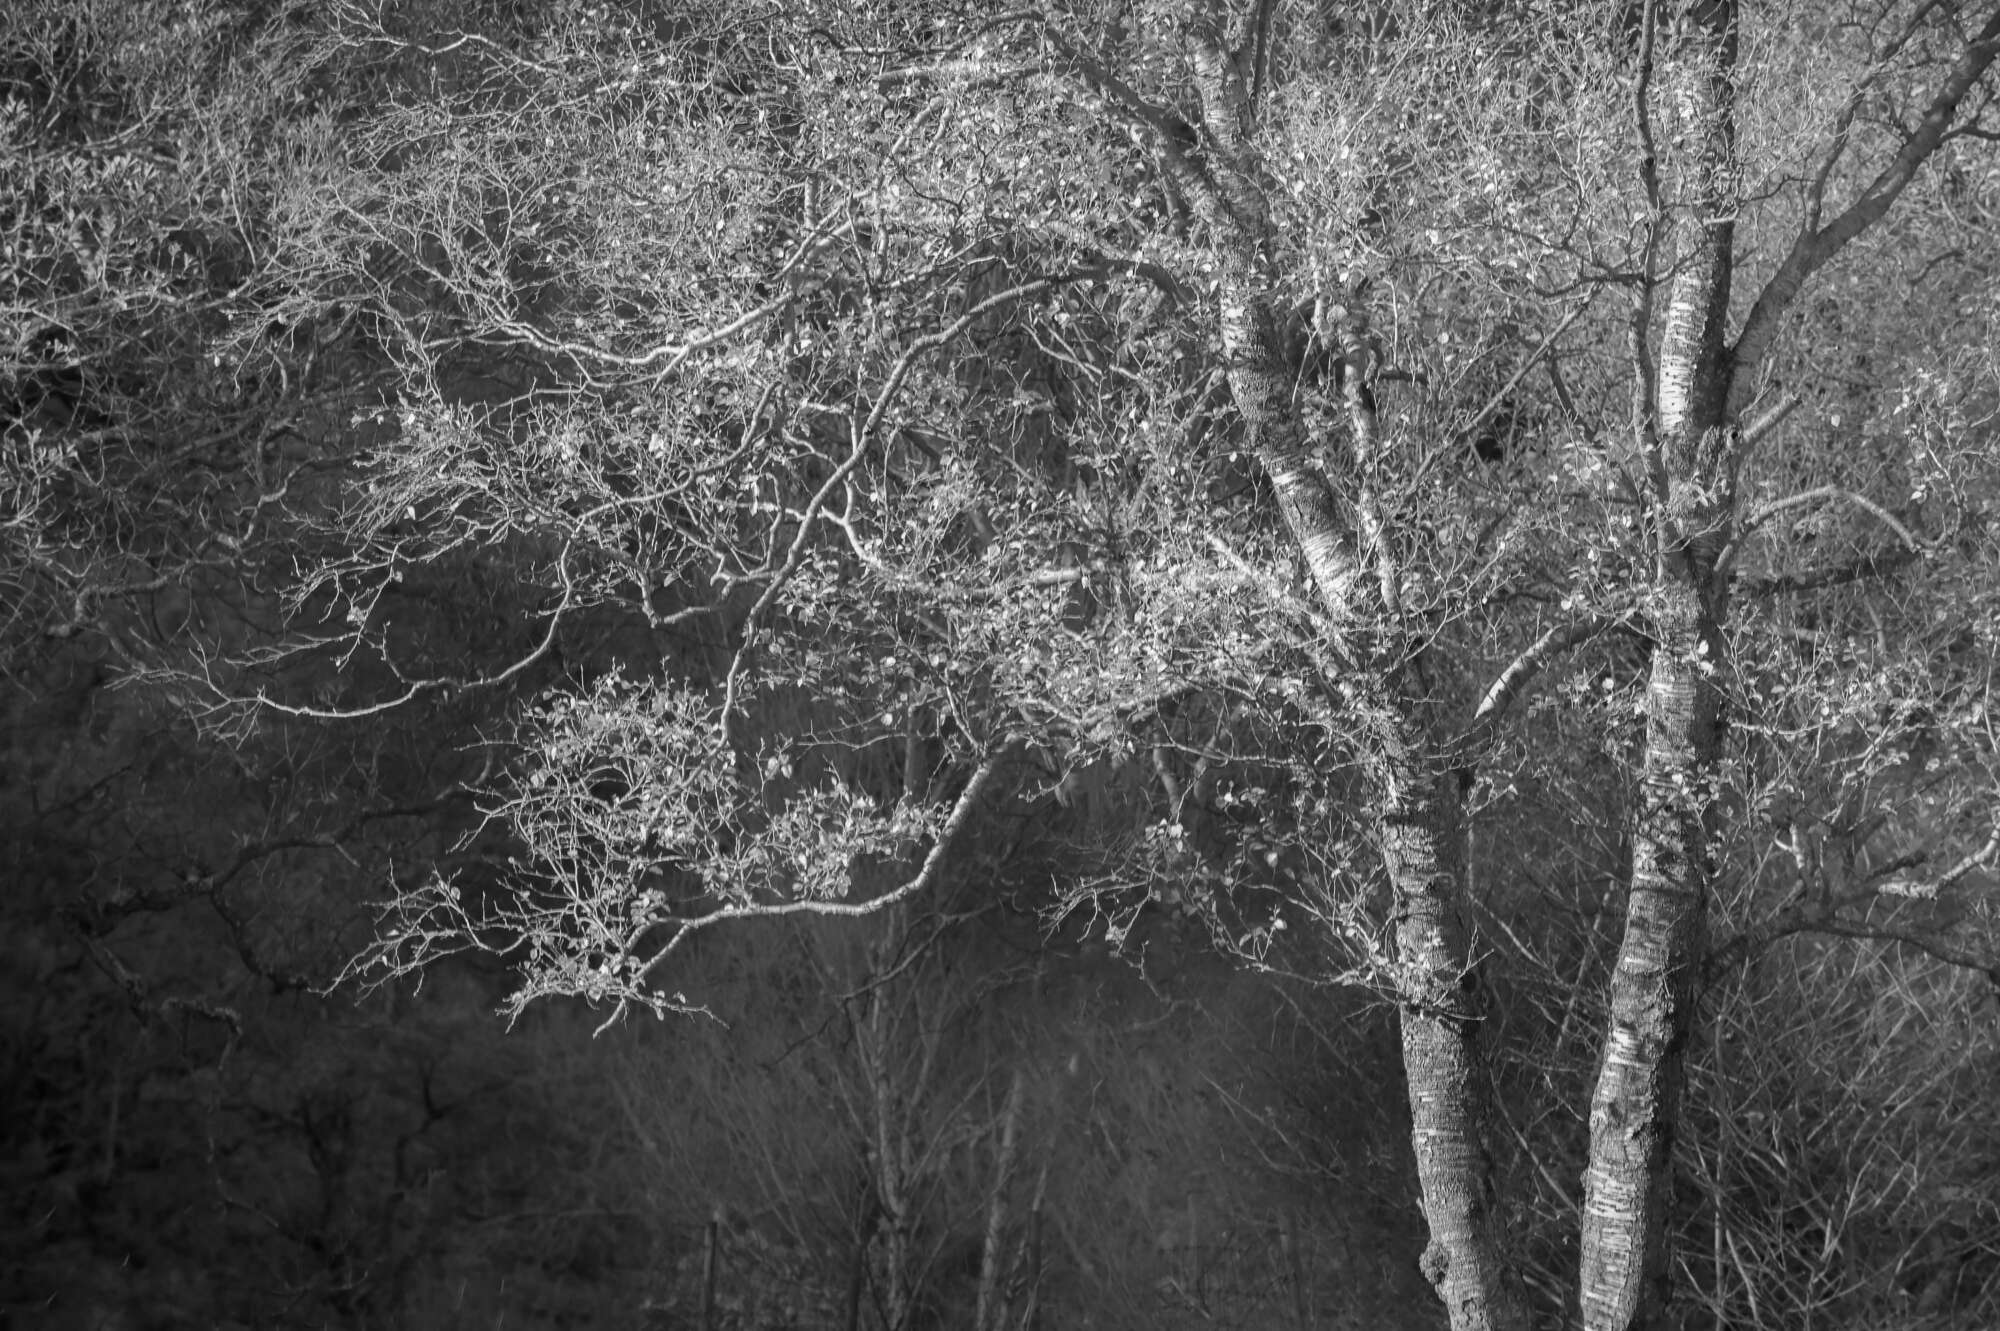 Tree Study in Infrared by Michael Pilkington aspect2i